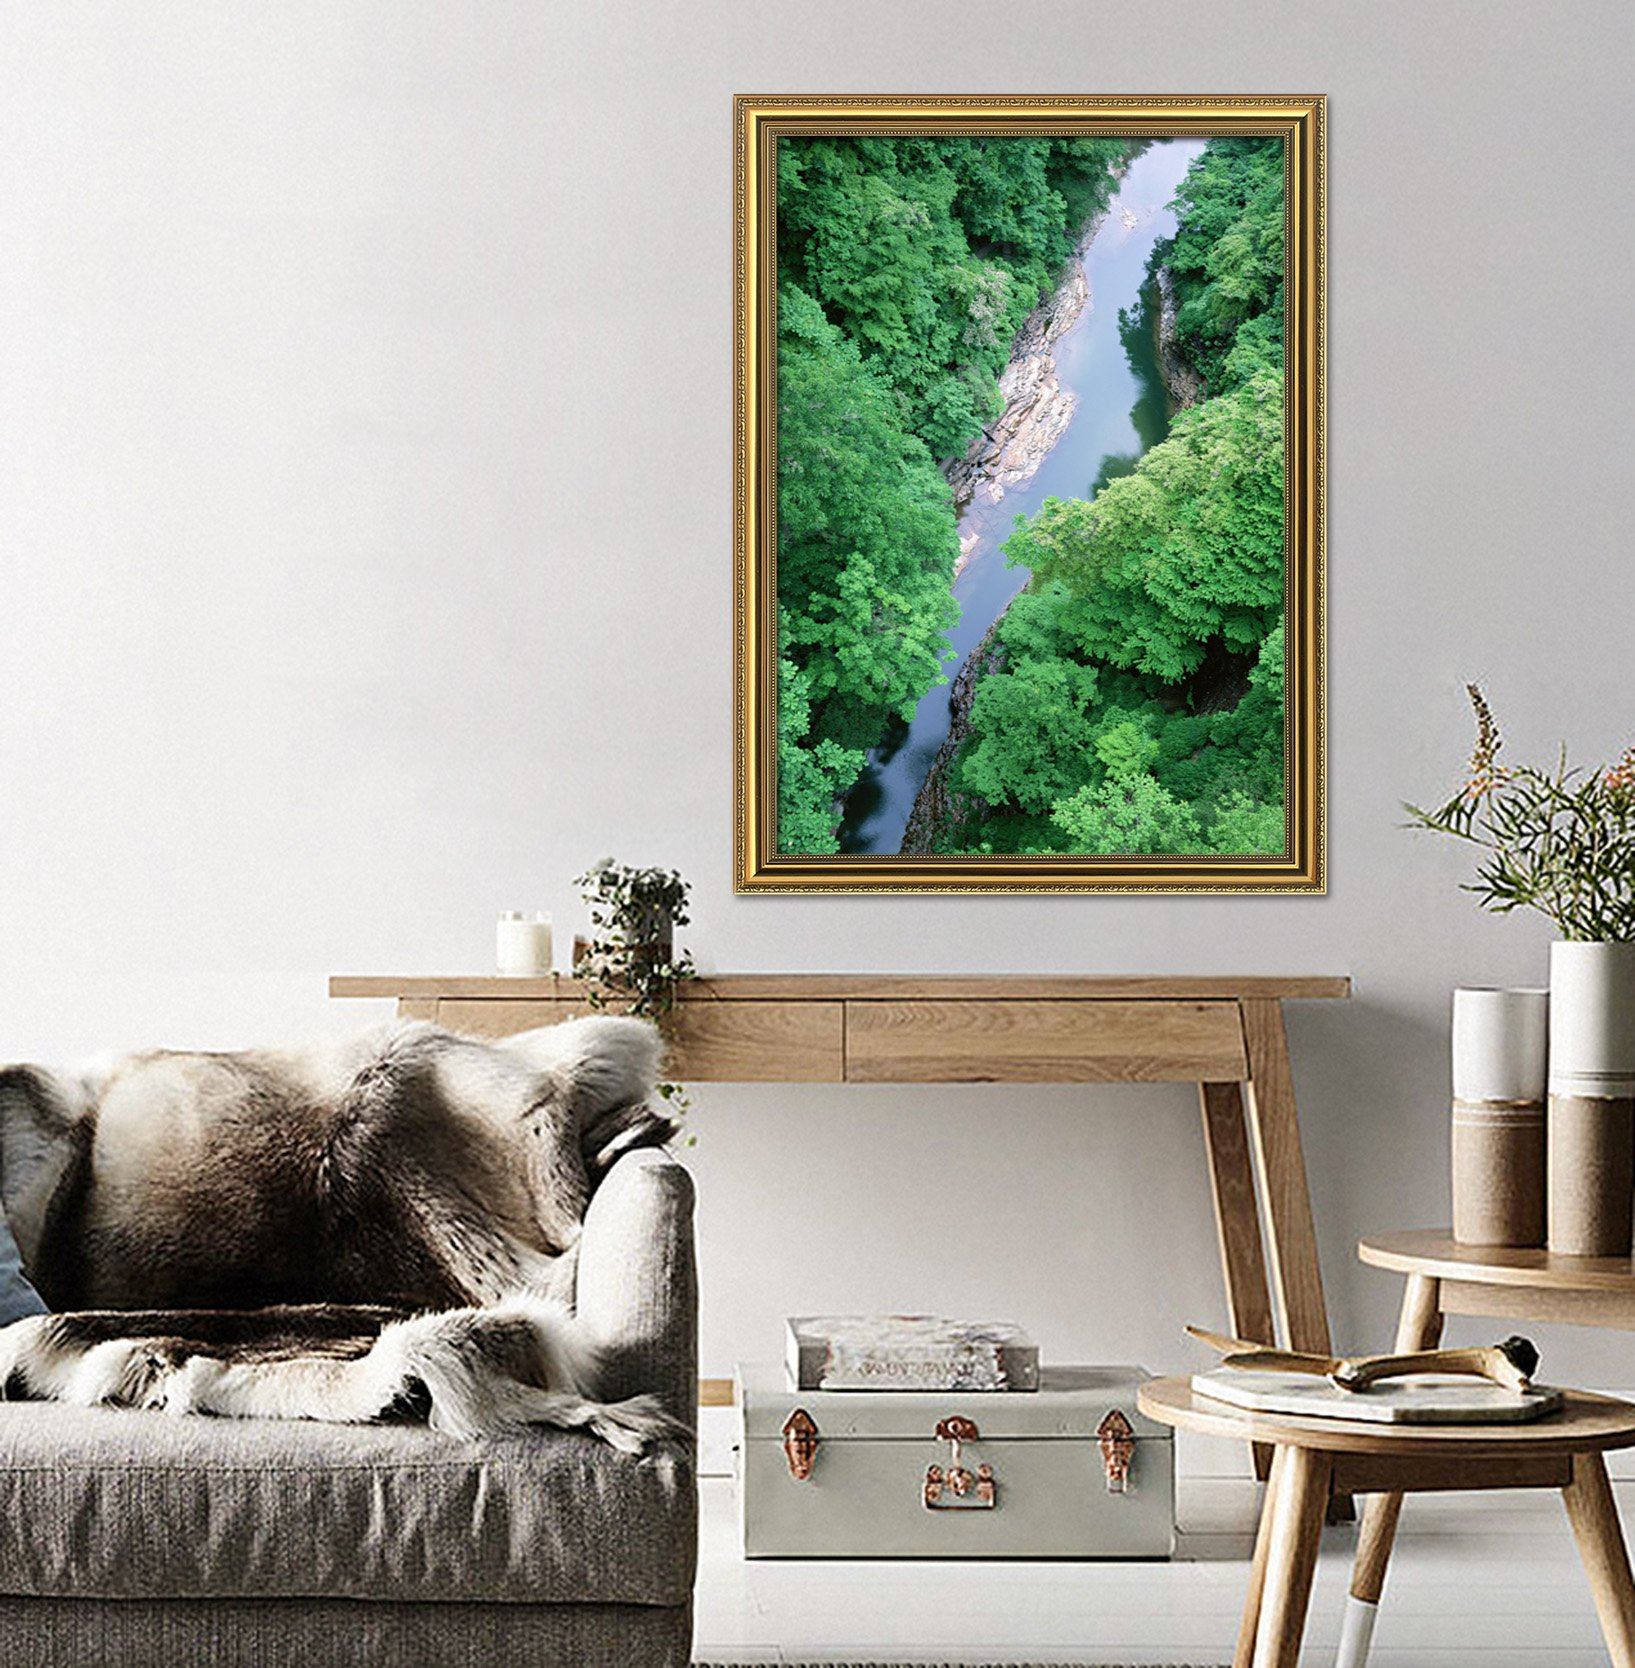 3D Forest River 037 Fake Framed Print Painting Wallpaper AJ Creativity Home 